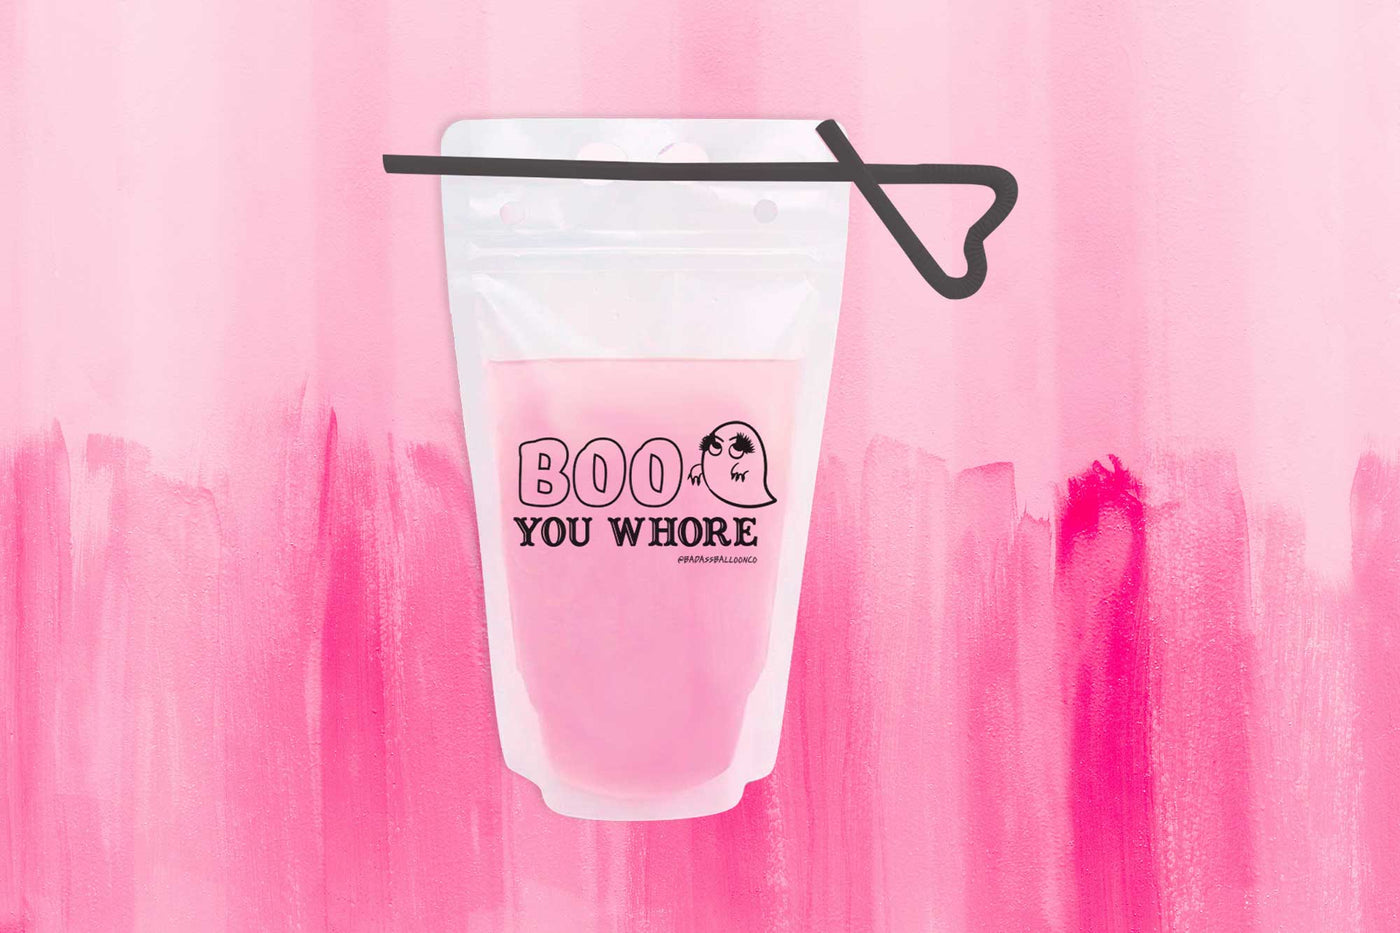 Boo You Whore Drink Pouch | Mean Girls Party Decor